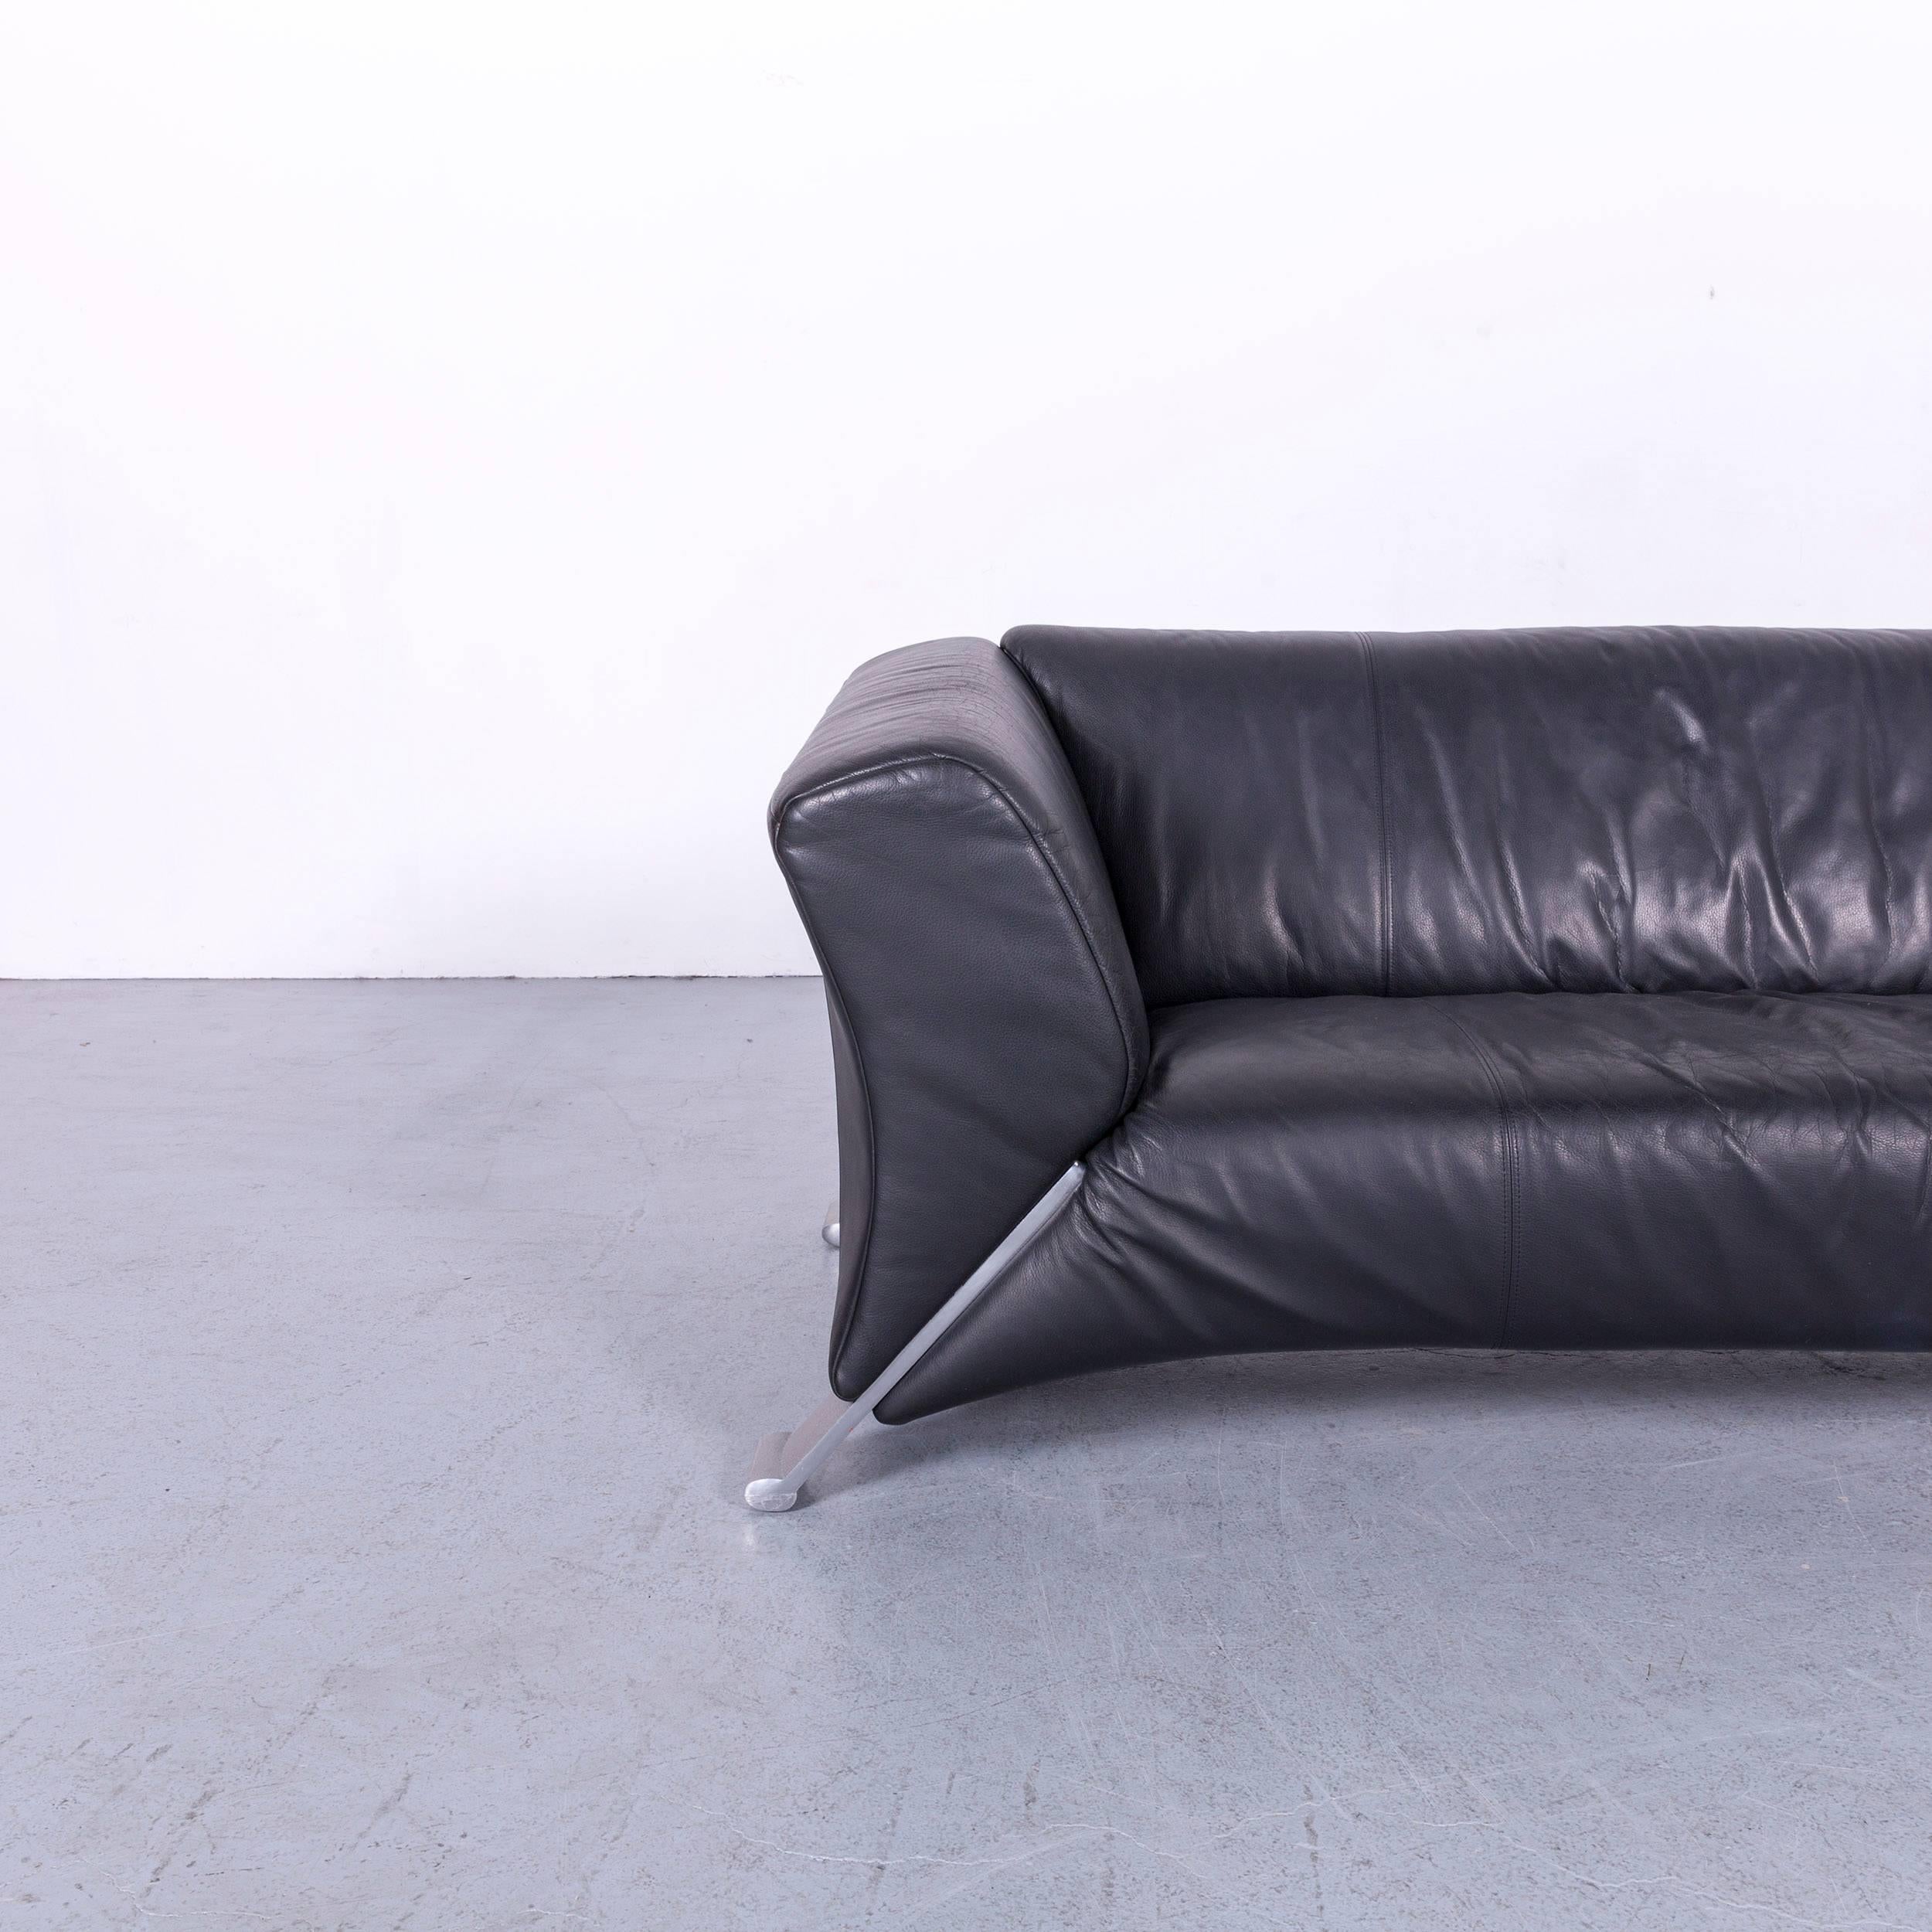 We bring to you an Rolf Benz 322 designer sofa black three-seat leather modern couch metal feet.